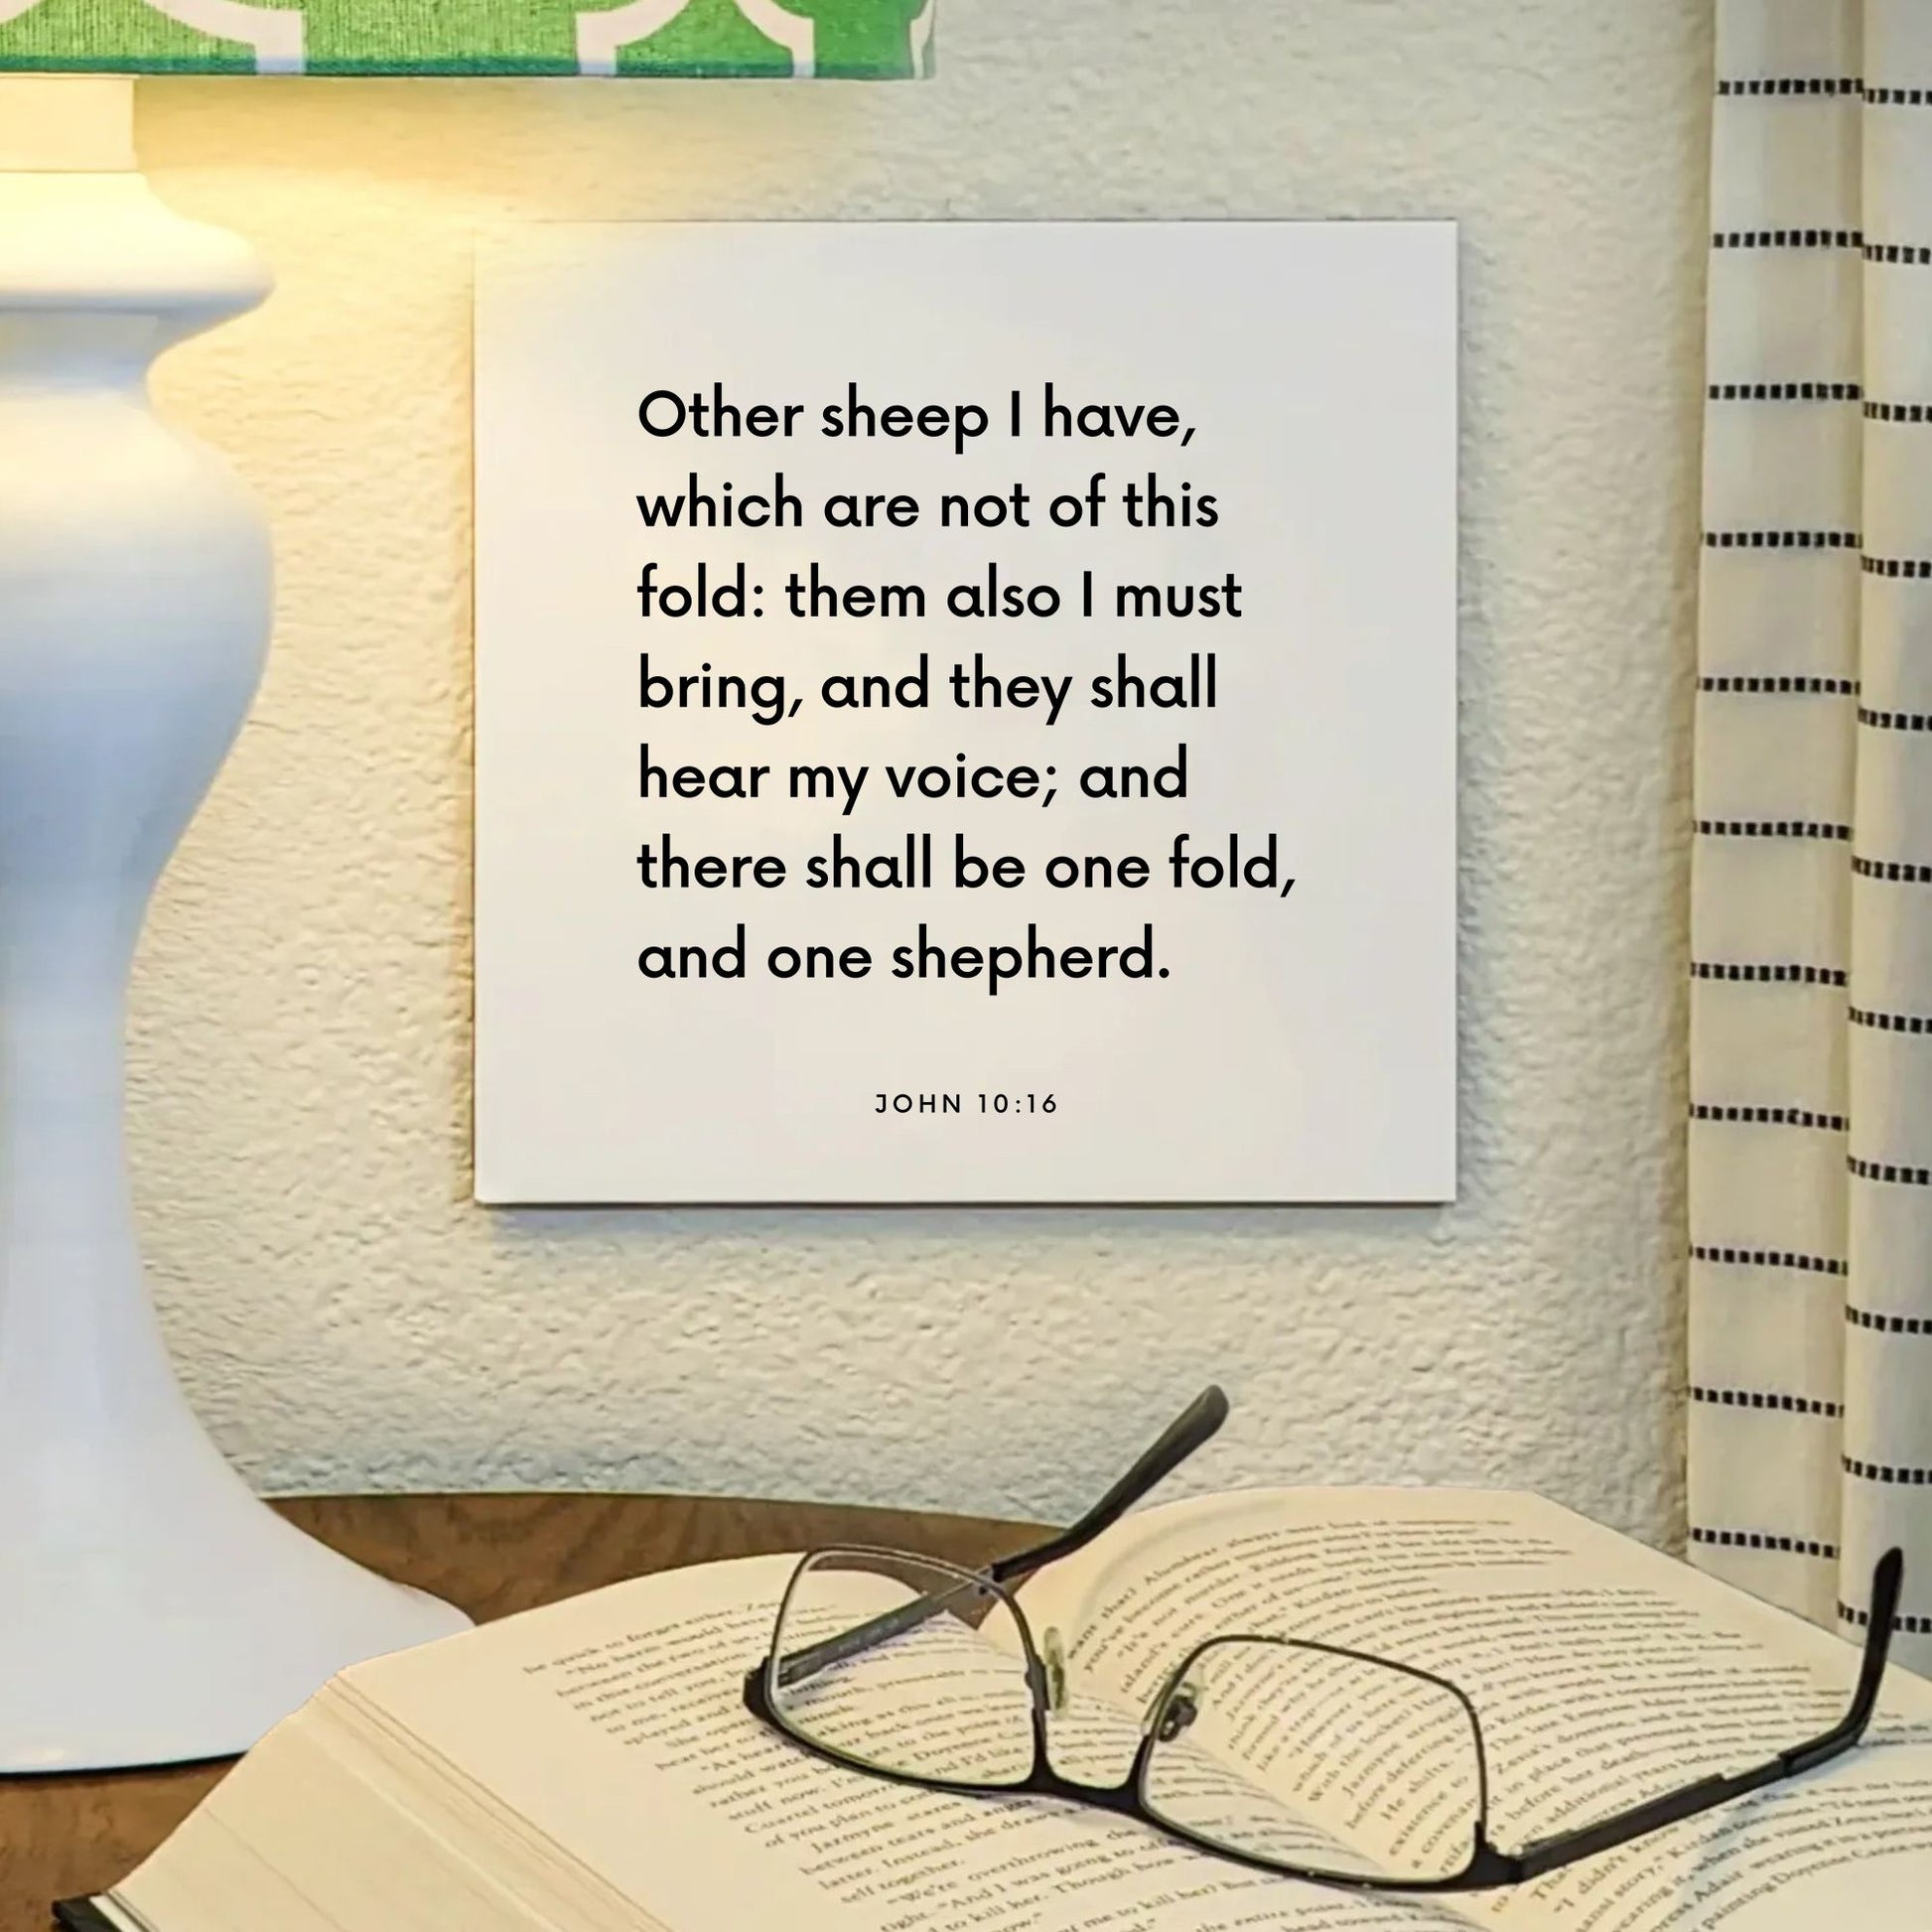 Lamp mouting of the scripture tile for John 10:16 - "Other sheep I have, which are not of this fold"